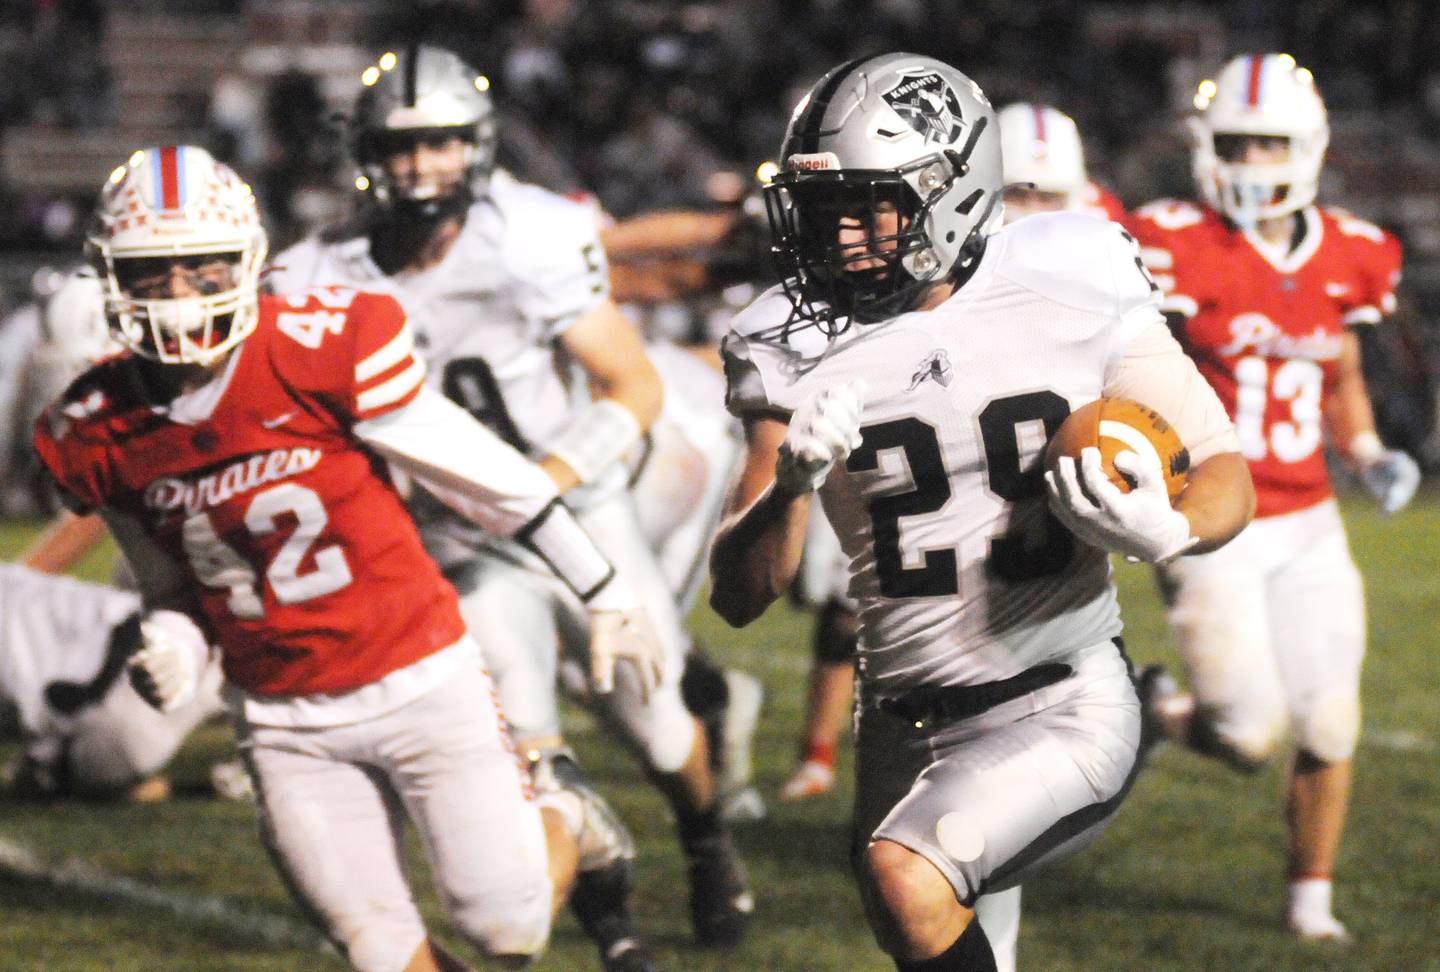 Kaneland's Chris Ruchaj carries the ball downfield past the defense of Ottawa's Branden Aguirre at King Field on Friday, Sept. 23, 2022.